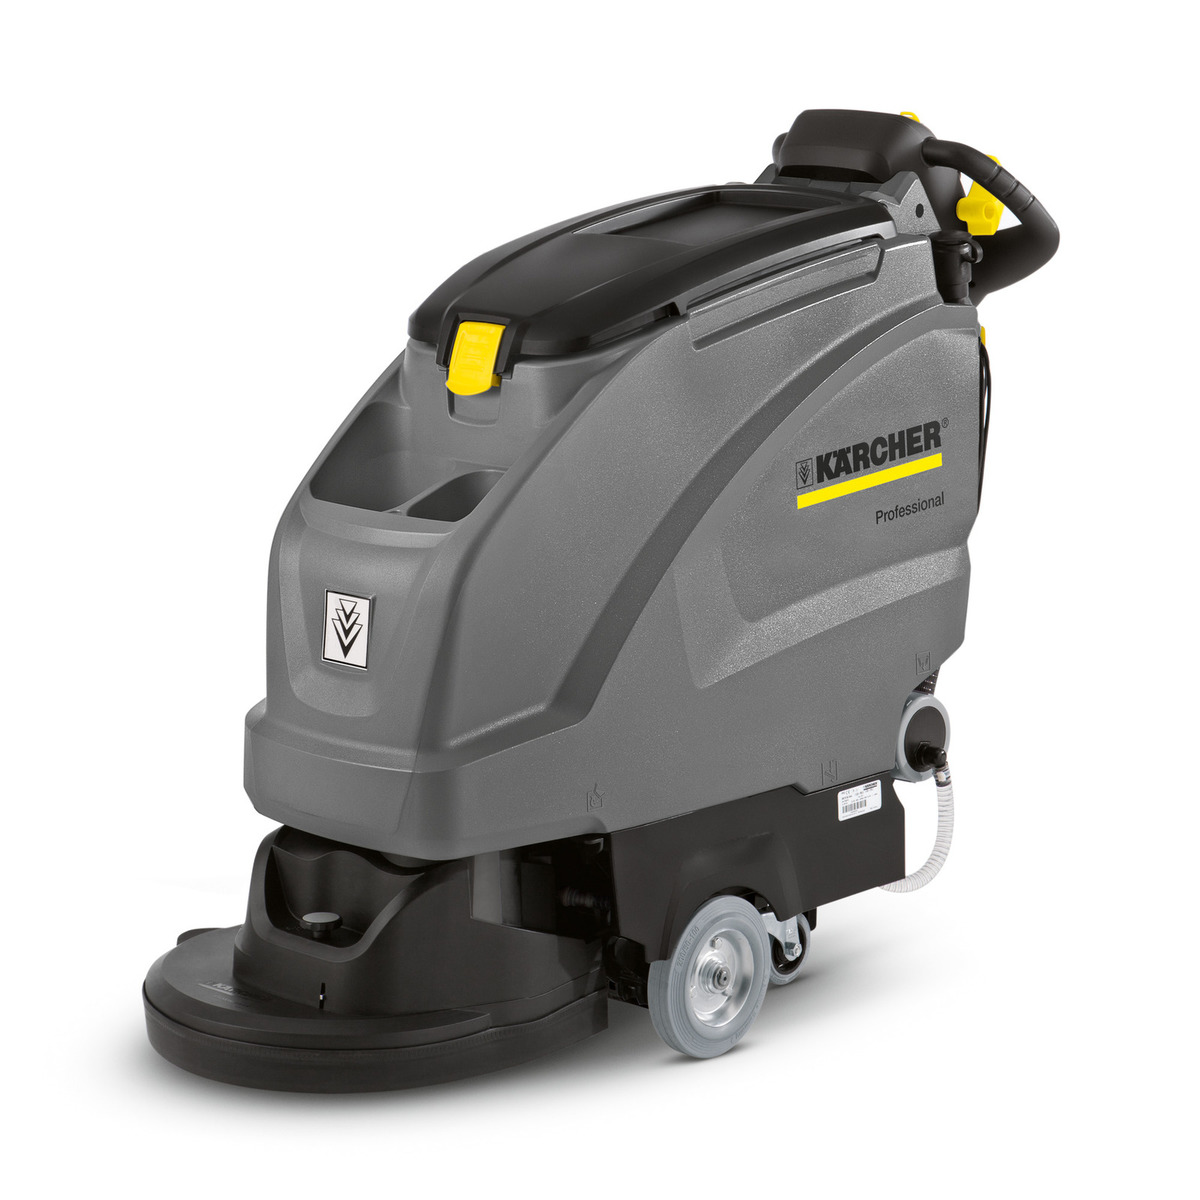 Karcher B 40 W Bp Walk-Behind Auto Scrubber karcher, b, 40, bp, walk-behind, commercial, auto-scrubber, automatic, floor, cleaning, machine, professional, janitorial, powerful, 